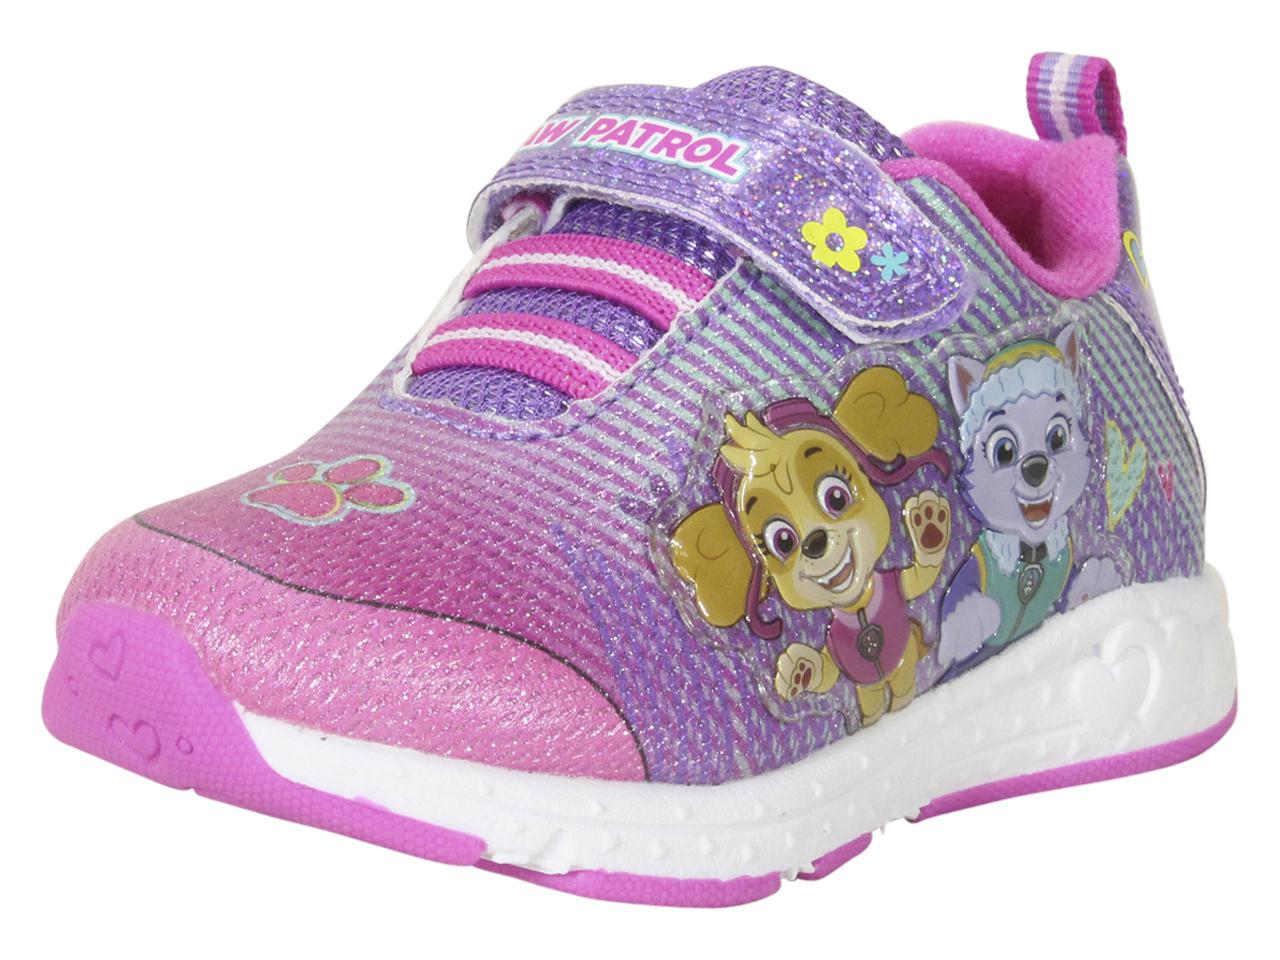 Paw Patrol Light Up Sneakers Shoes